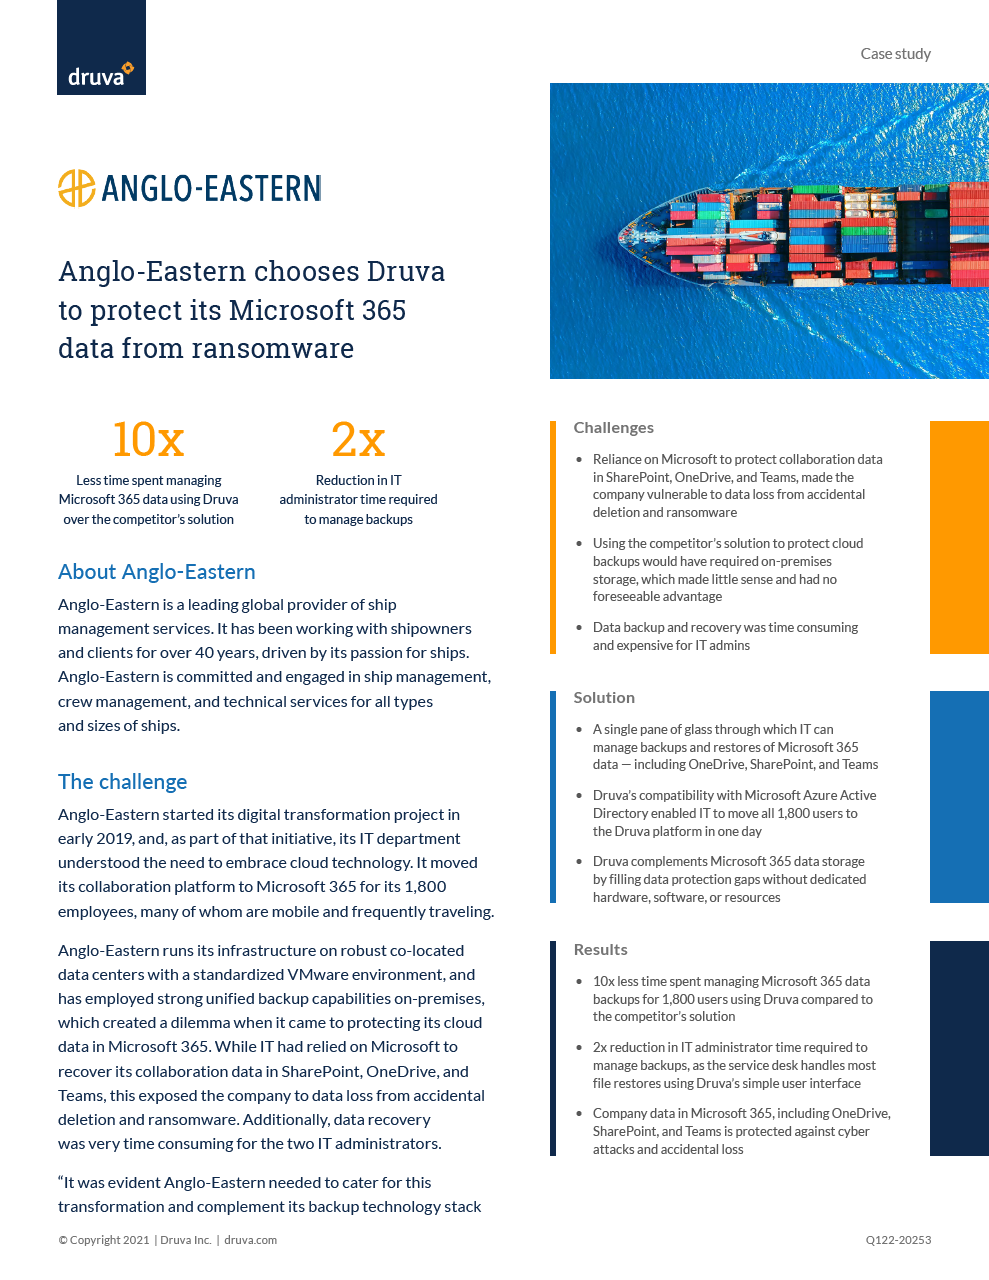 Anglo-Eastern chooses Druva to protect Microsoft 365 data from ransomware